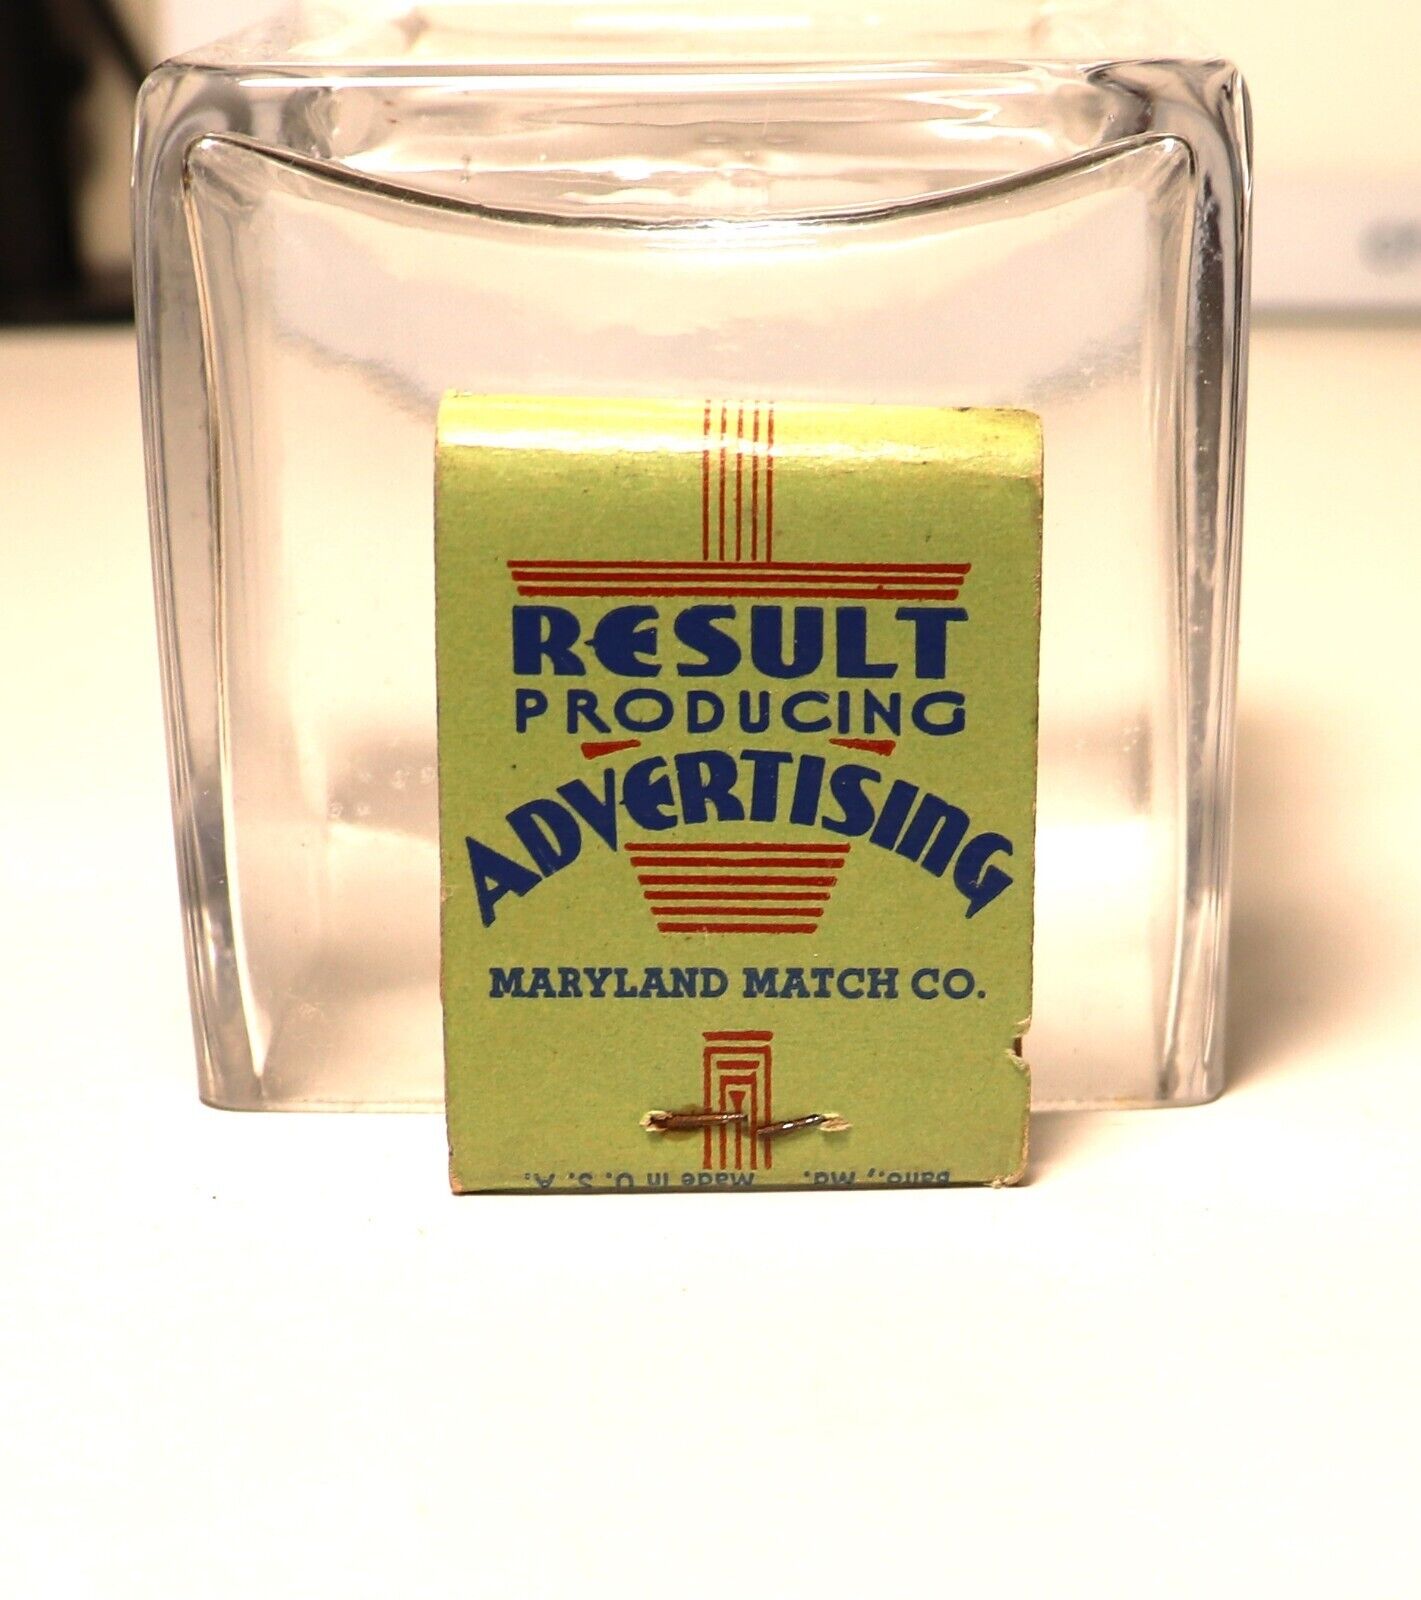 Vintage 1930s Maryland Match Company Result Producing Advertising Matchbook